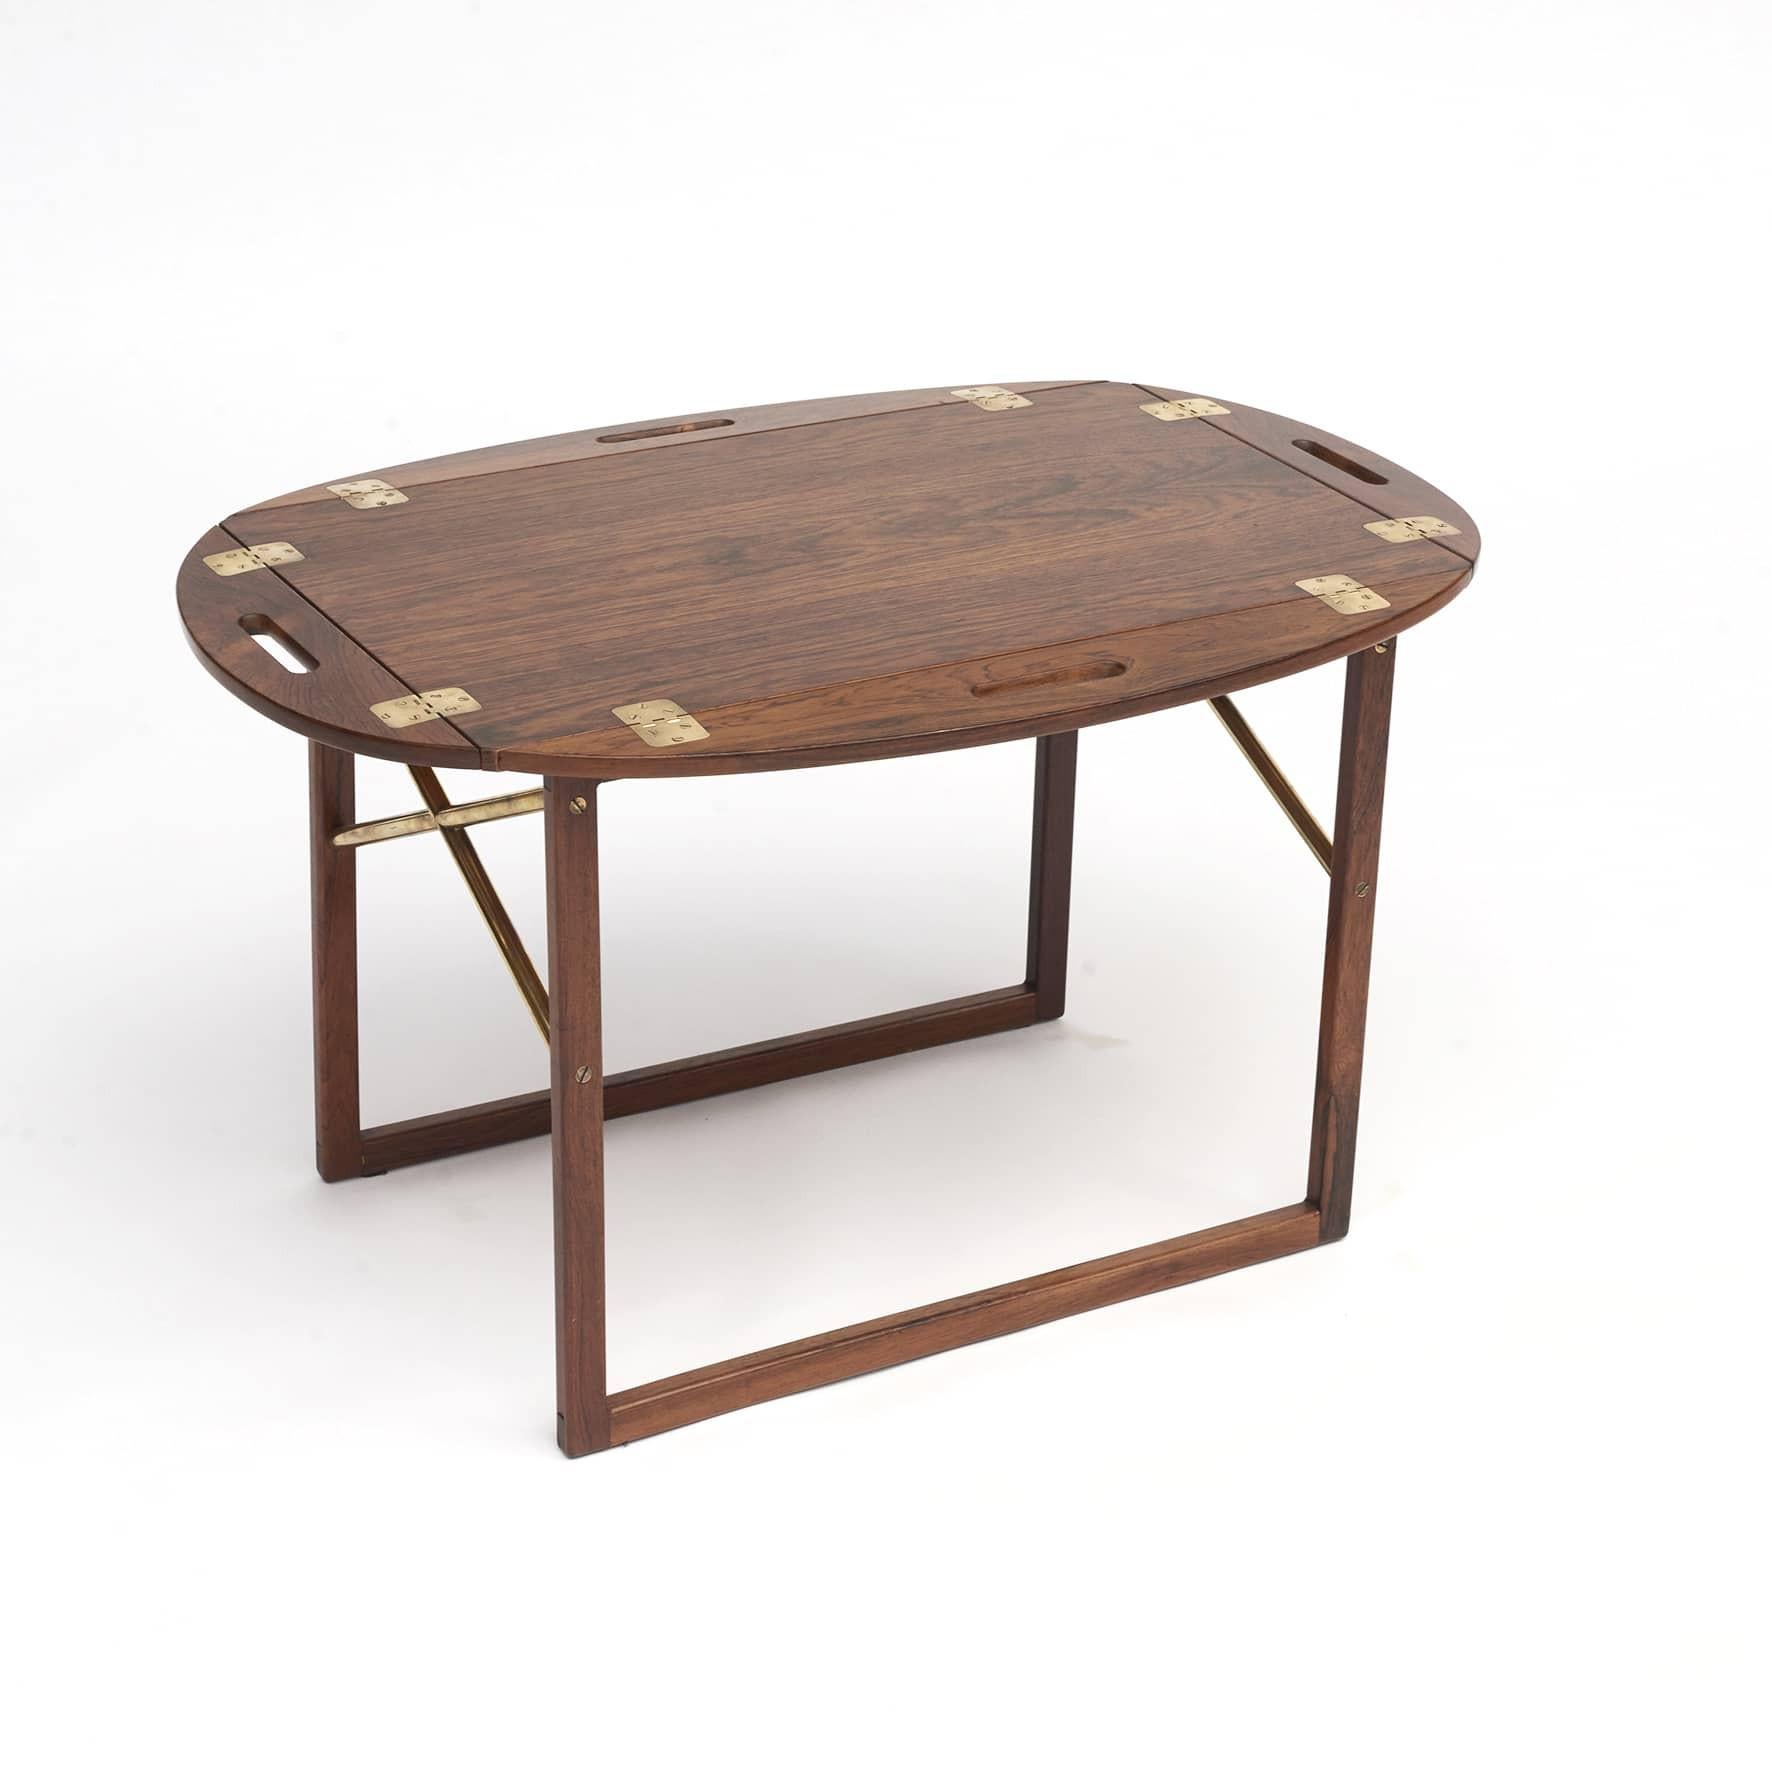 Svend Langkilde butler's tray table in hardwood, with brass fittings.
Between leg cross struts in brass.
Table top can be lifted off, with foldable sides up and down.
Measures unfolded H: 58, W: 74, D: 47.

Made in the 1960s for Illum